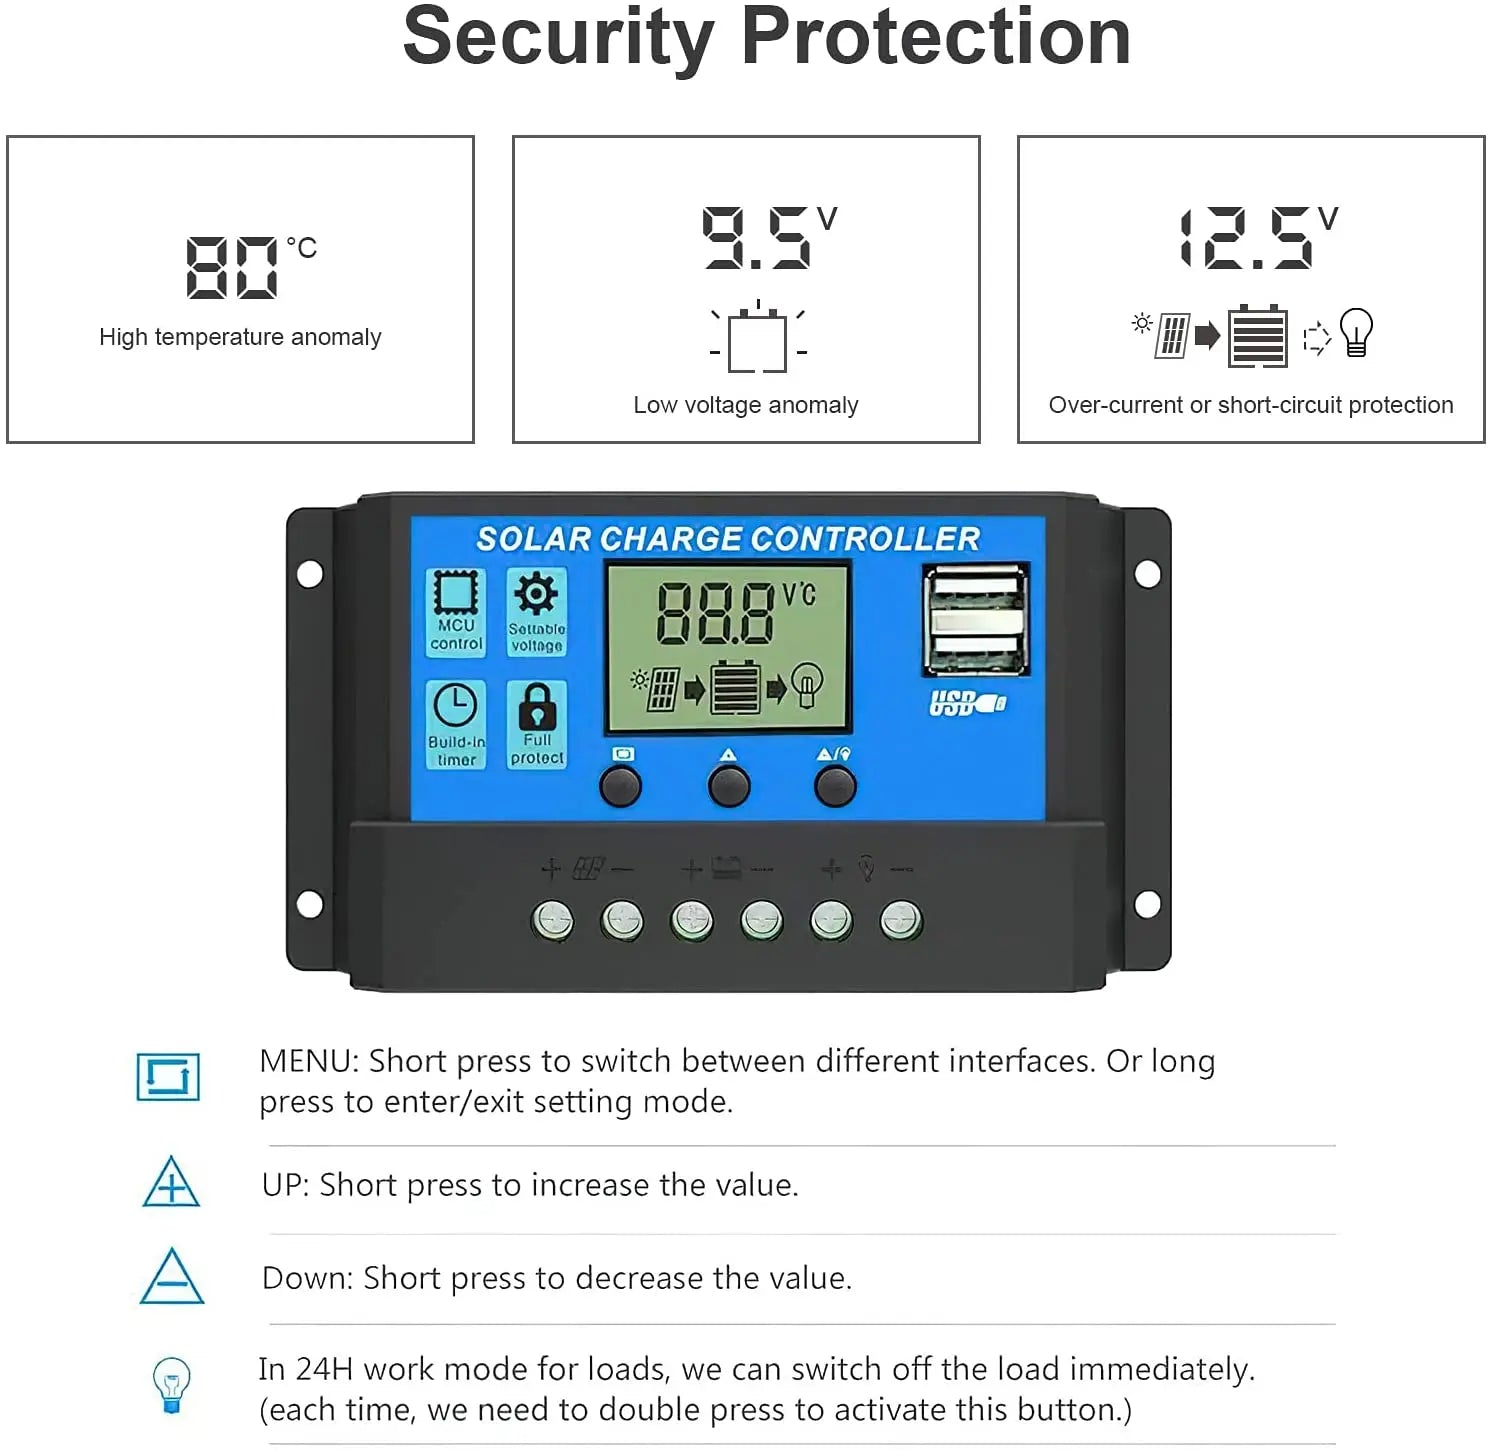 Intelligent solar charge controller with security features: temperature, voltage, and short-circuit protection.